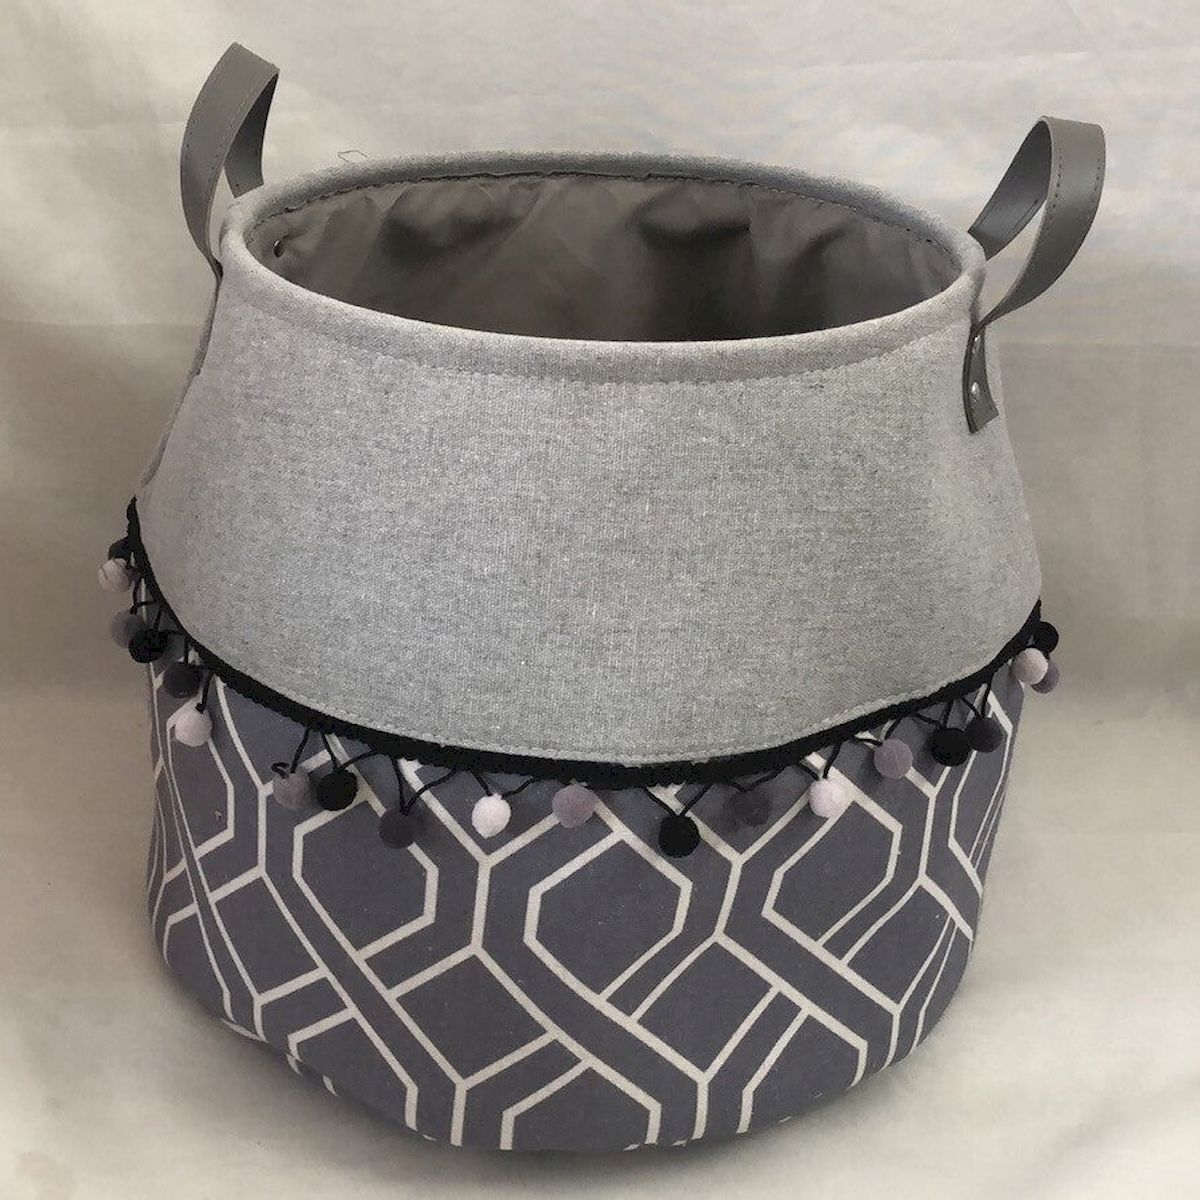 Picture of Mr. MJs Trading AI-2040-214 Gray Top with Gray & White Chain Pattern with Black Trim Handled Basket